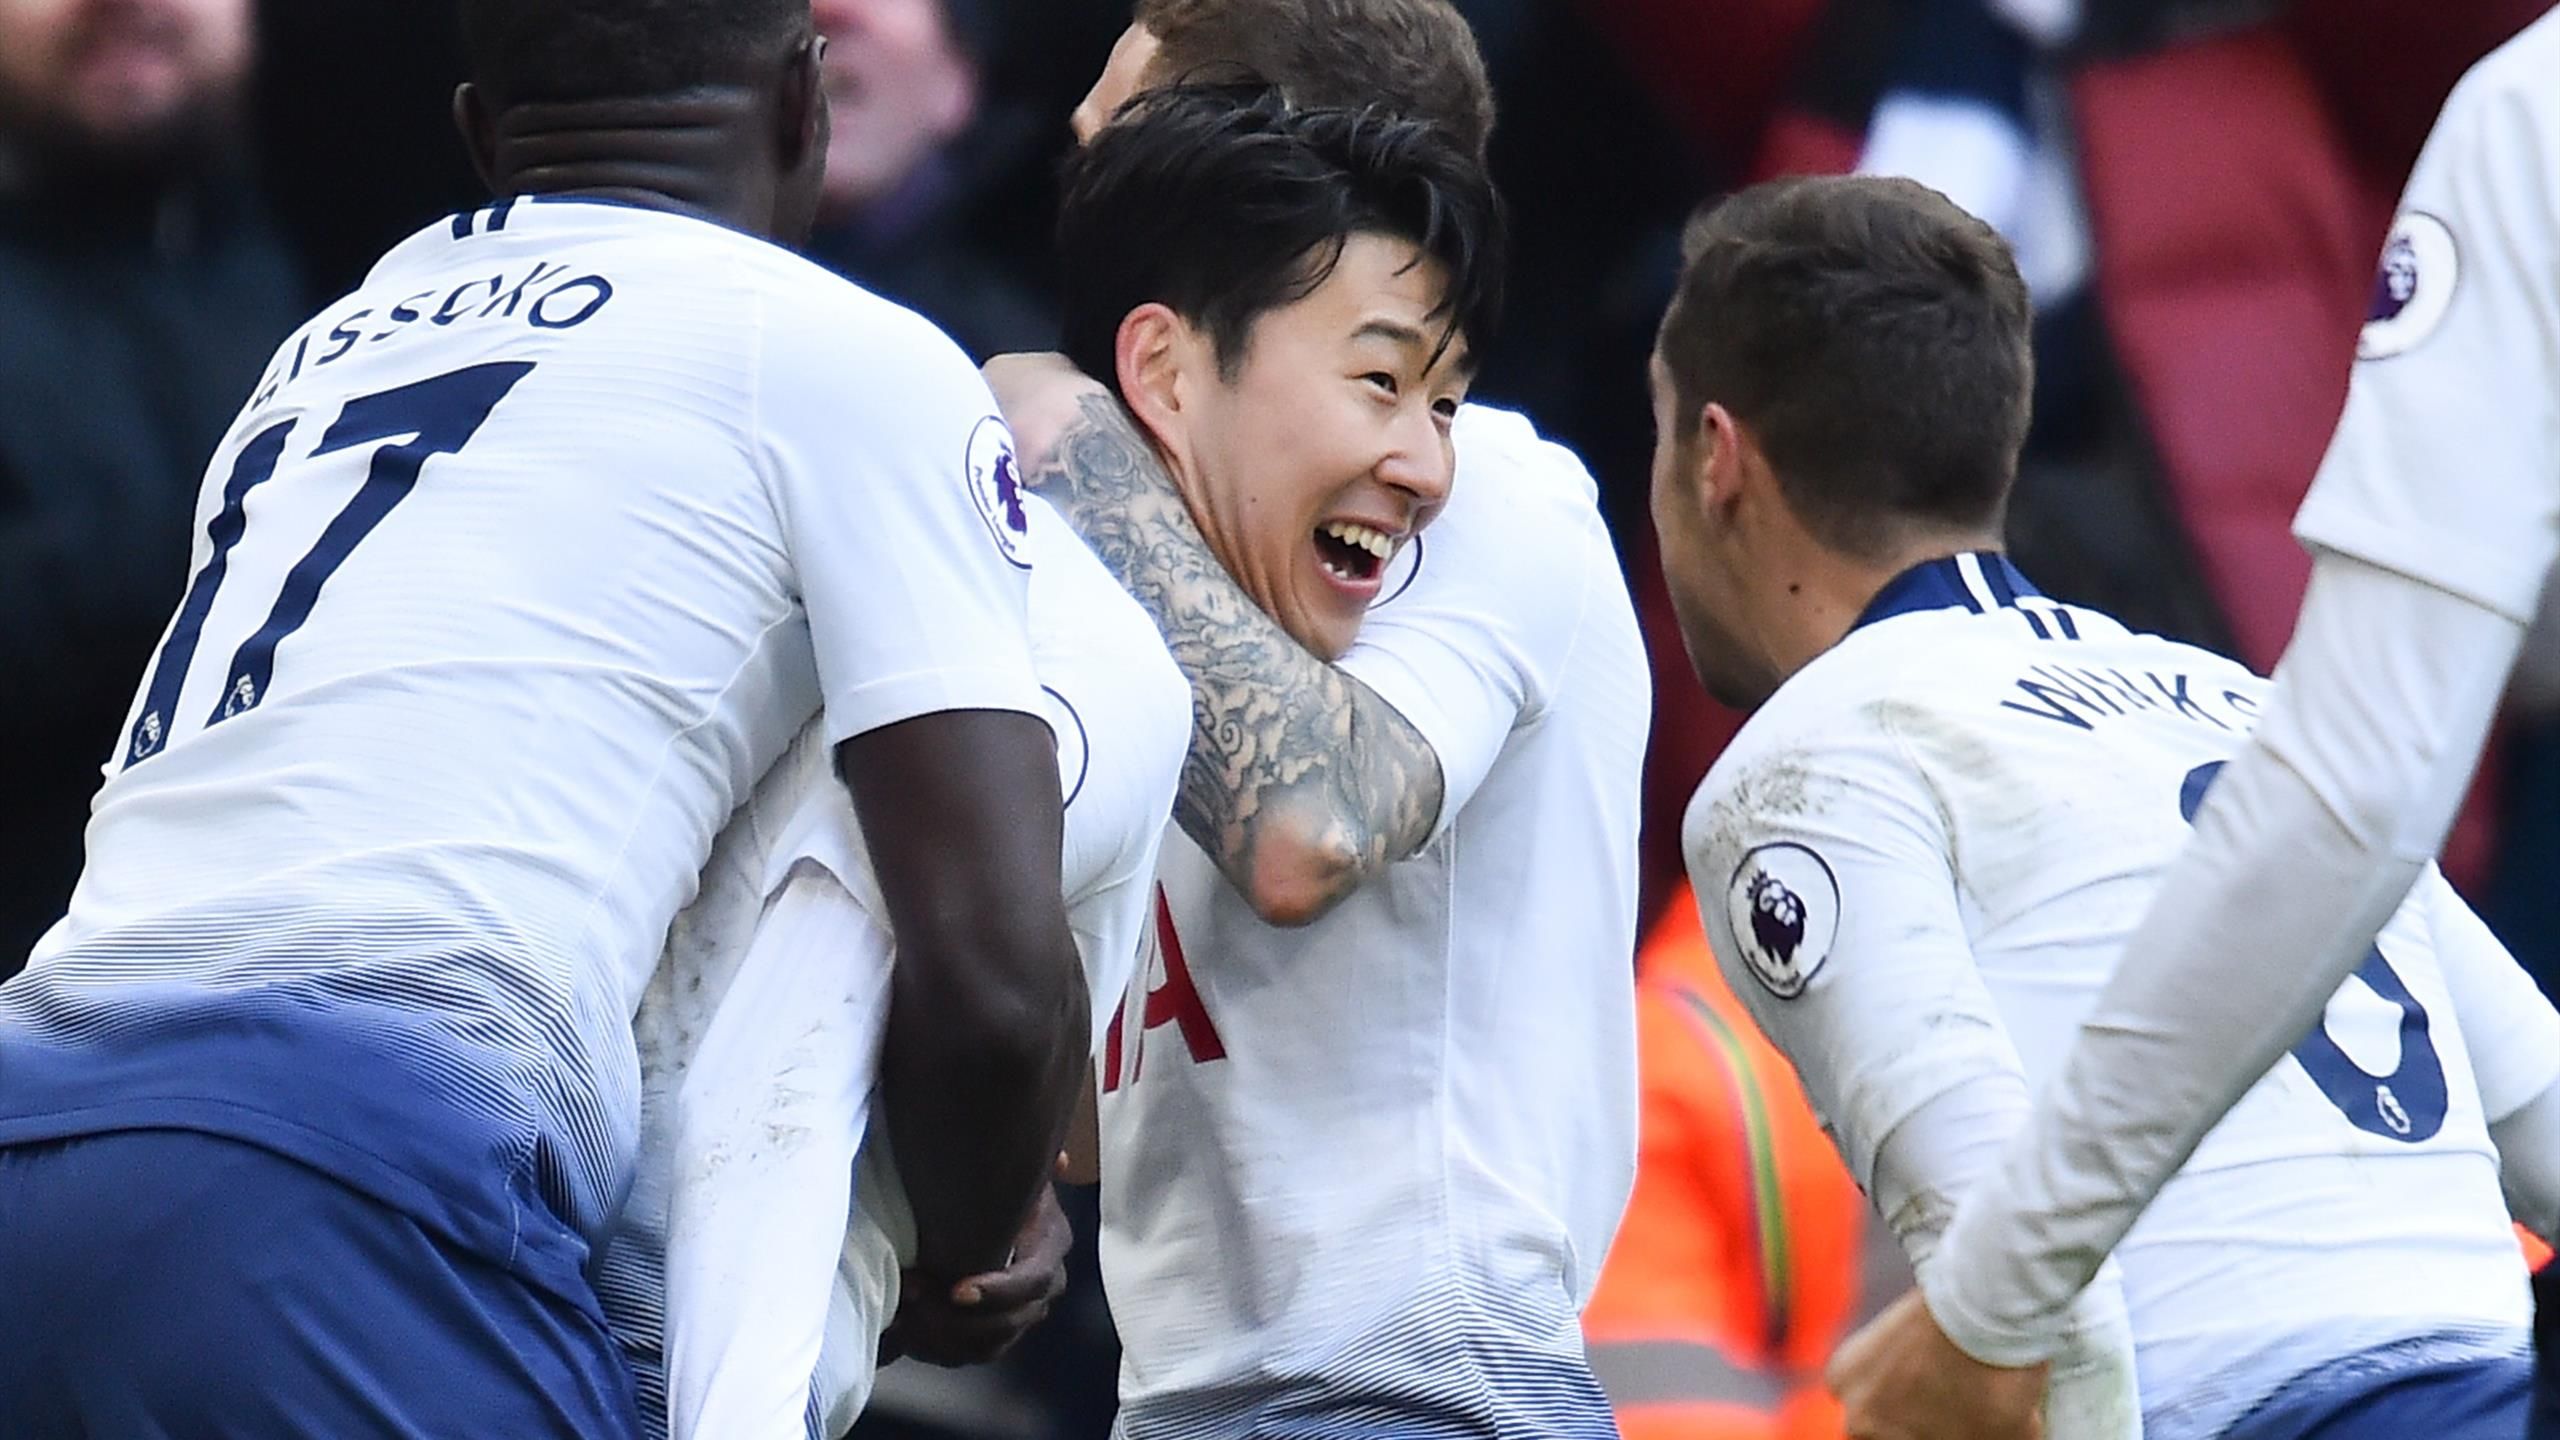 Tottenham's Hugo Lloris, Heung-min Son set stage for Spurs in